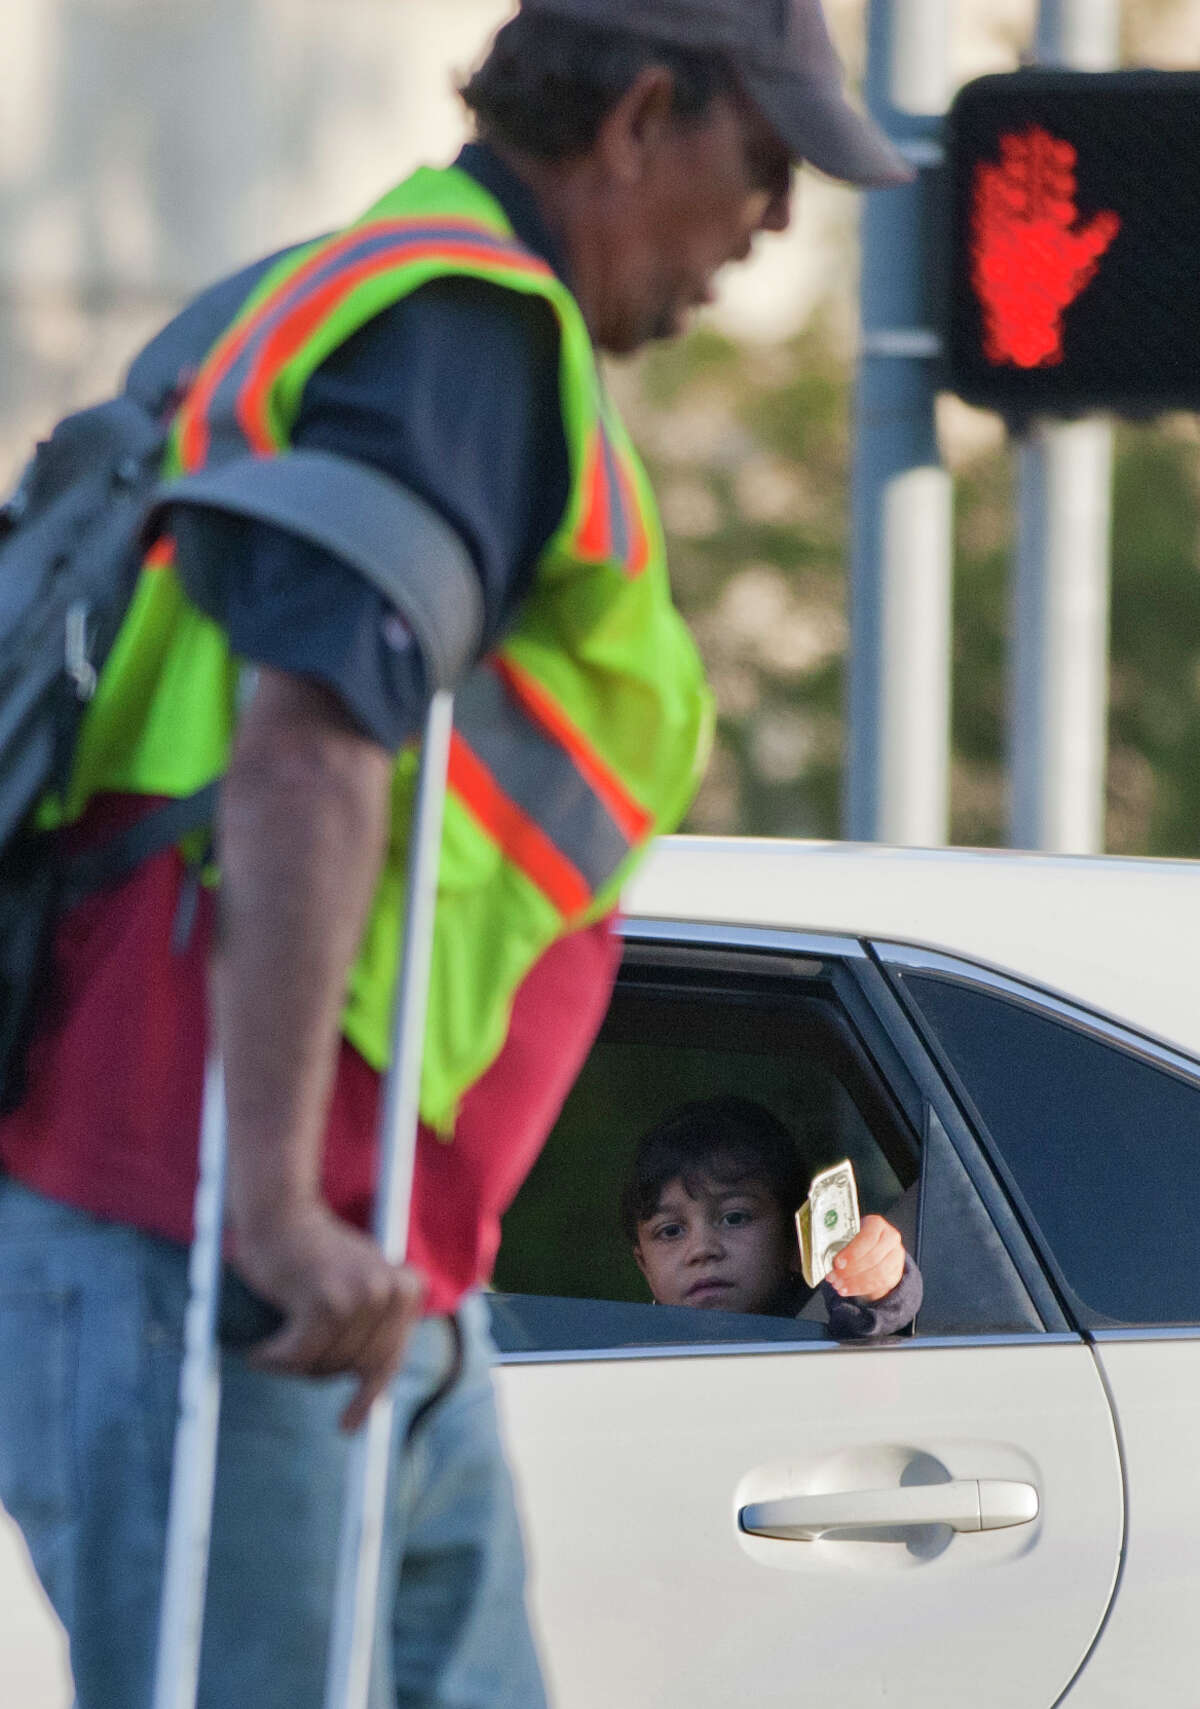 Heading for his regular panhandling spot and not yet paying attention, Carbonneau misses out on a few dollars from a passing car on Woodway at the Loop.